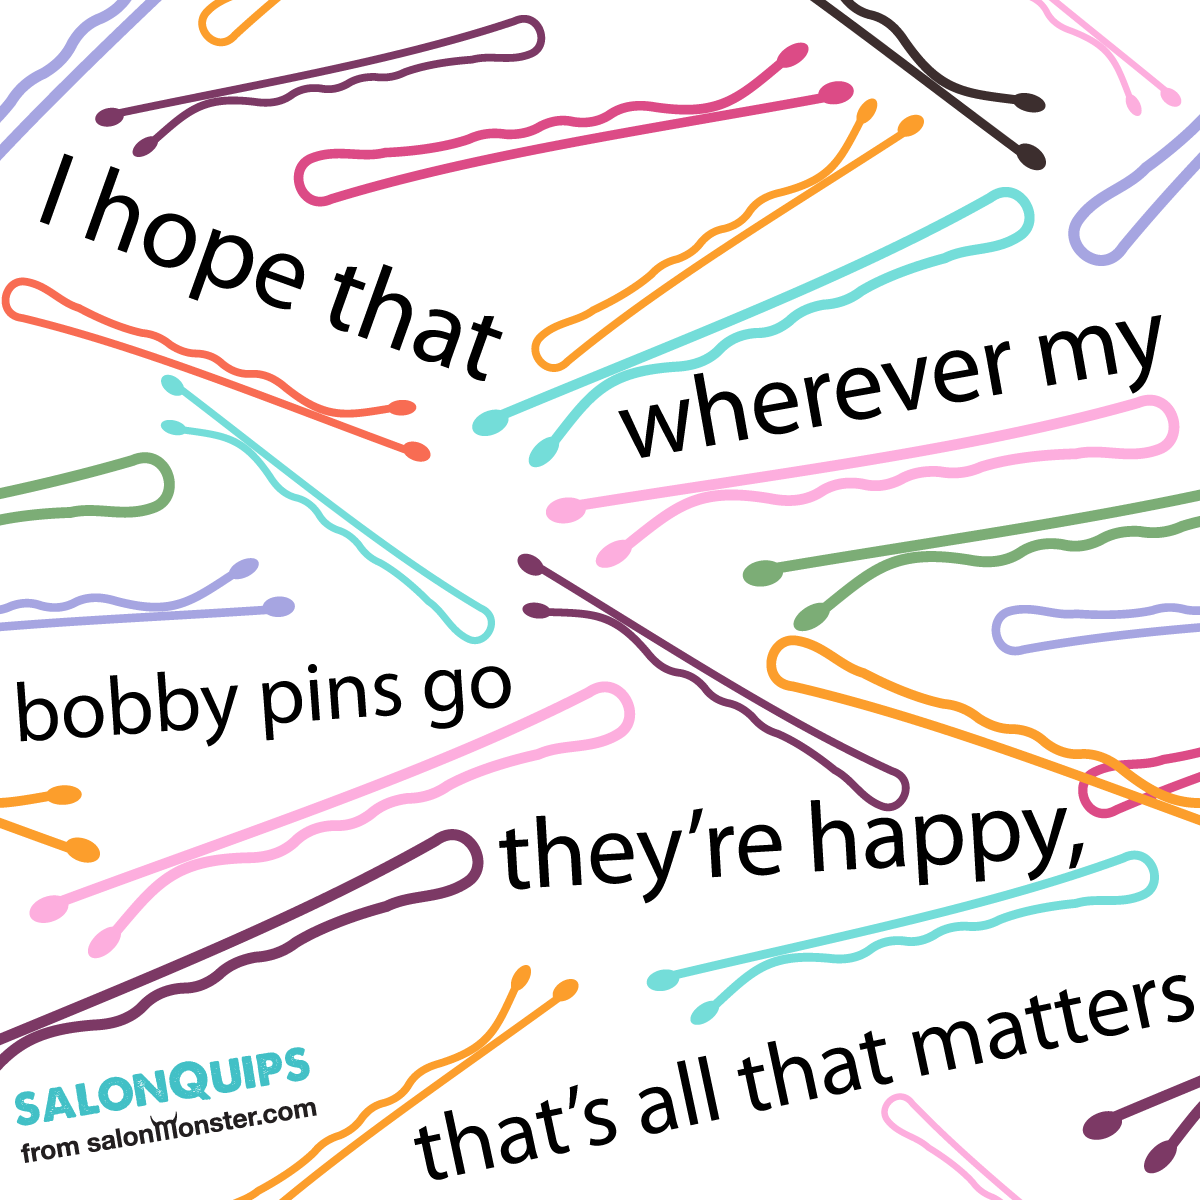 I-hope-that-wherever-my-bobby-pins-go-theyre-happy-thats-all-that-matters.png